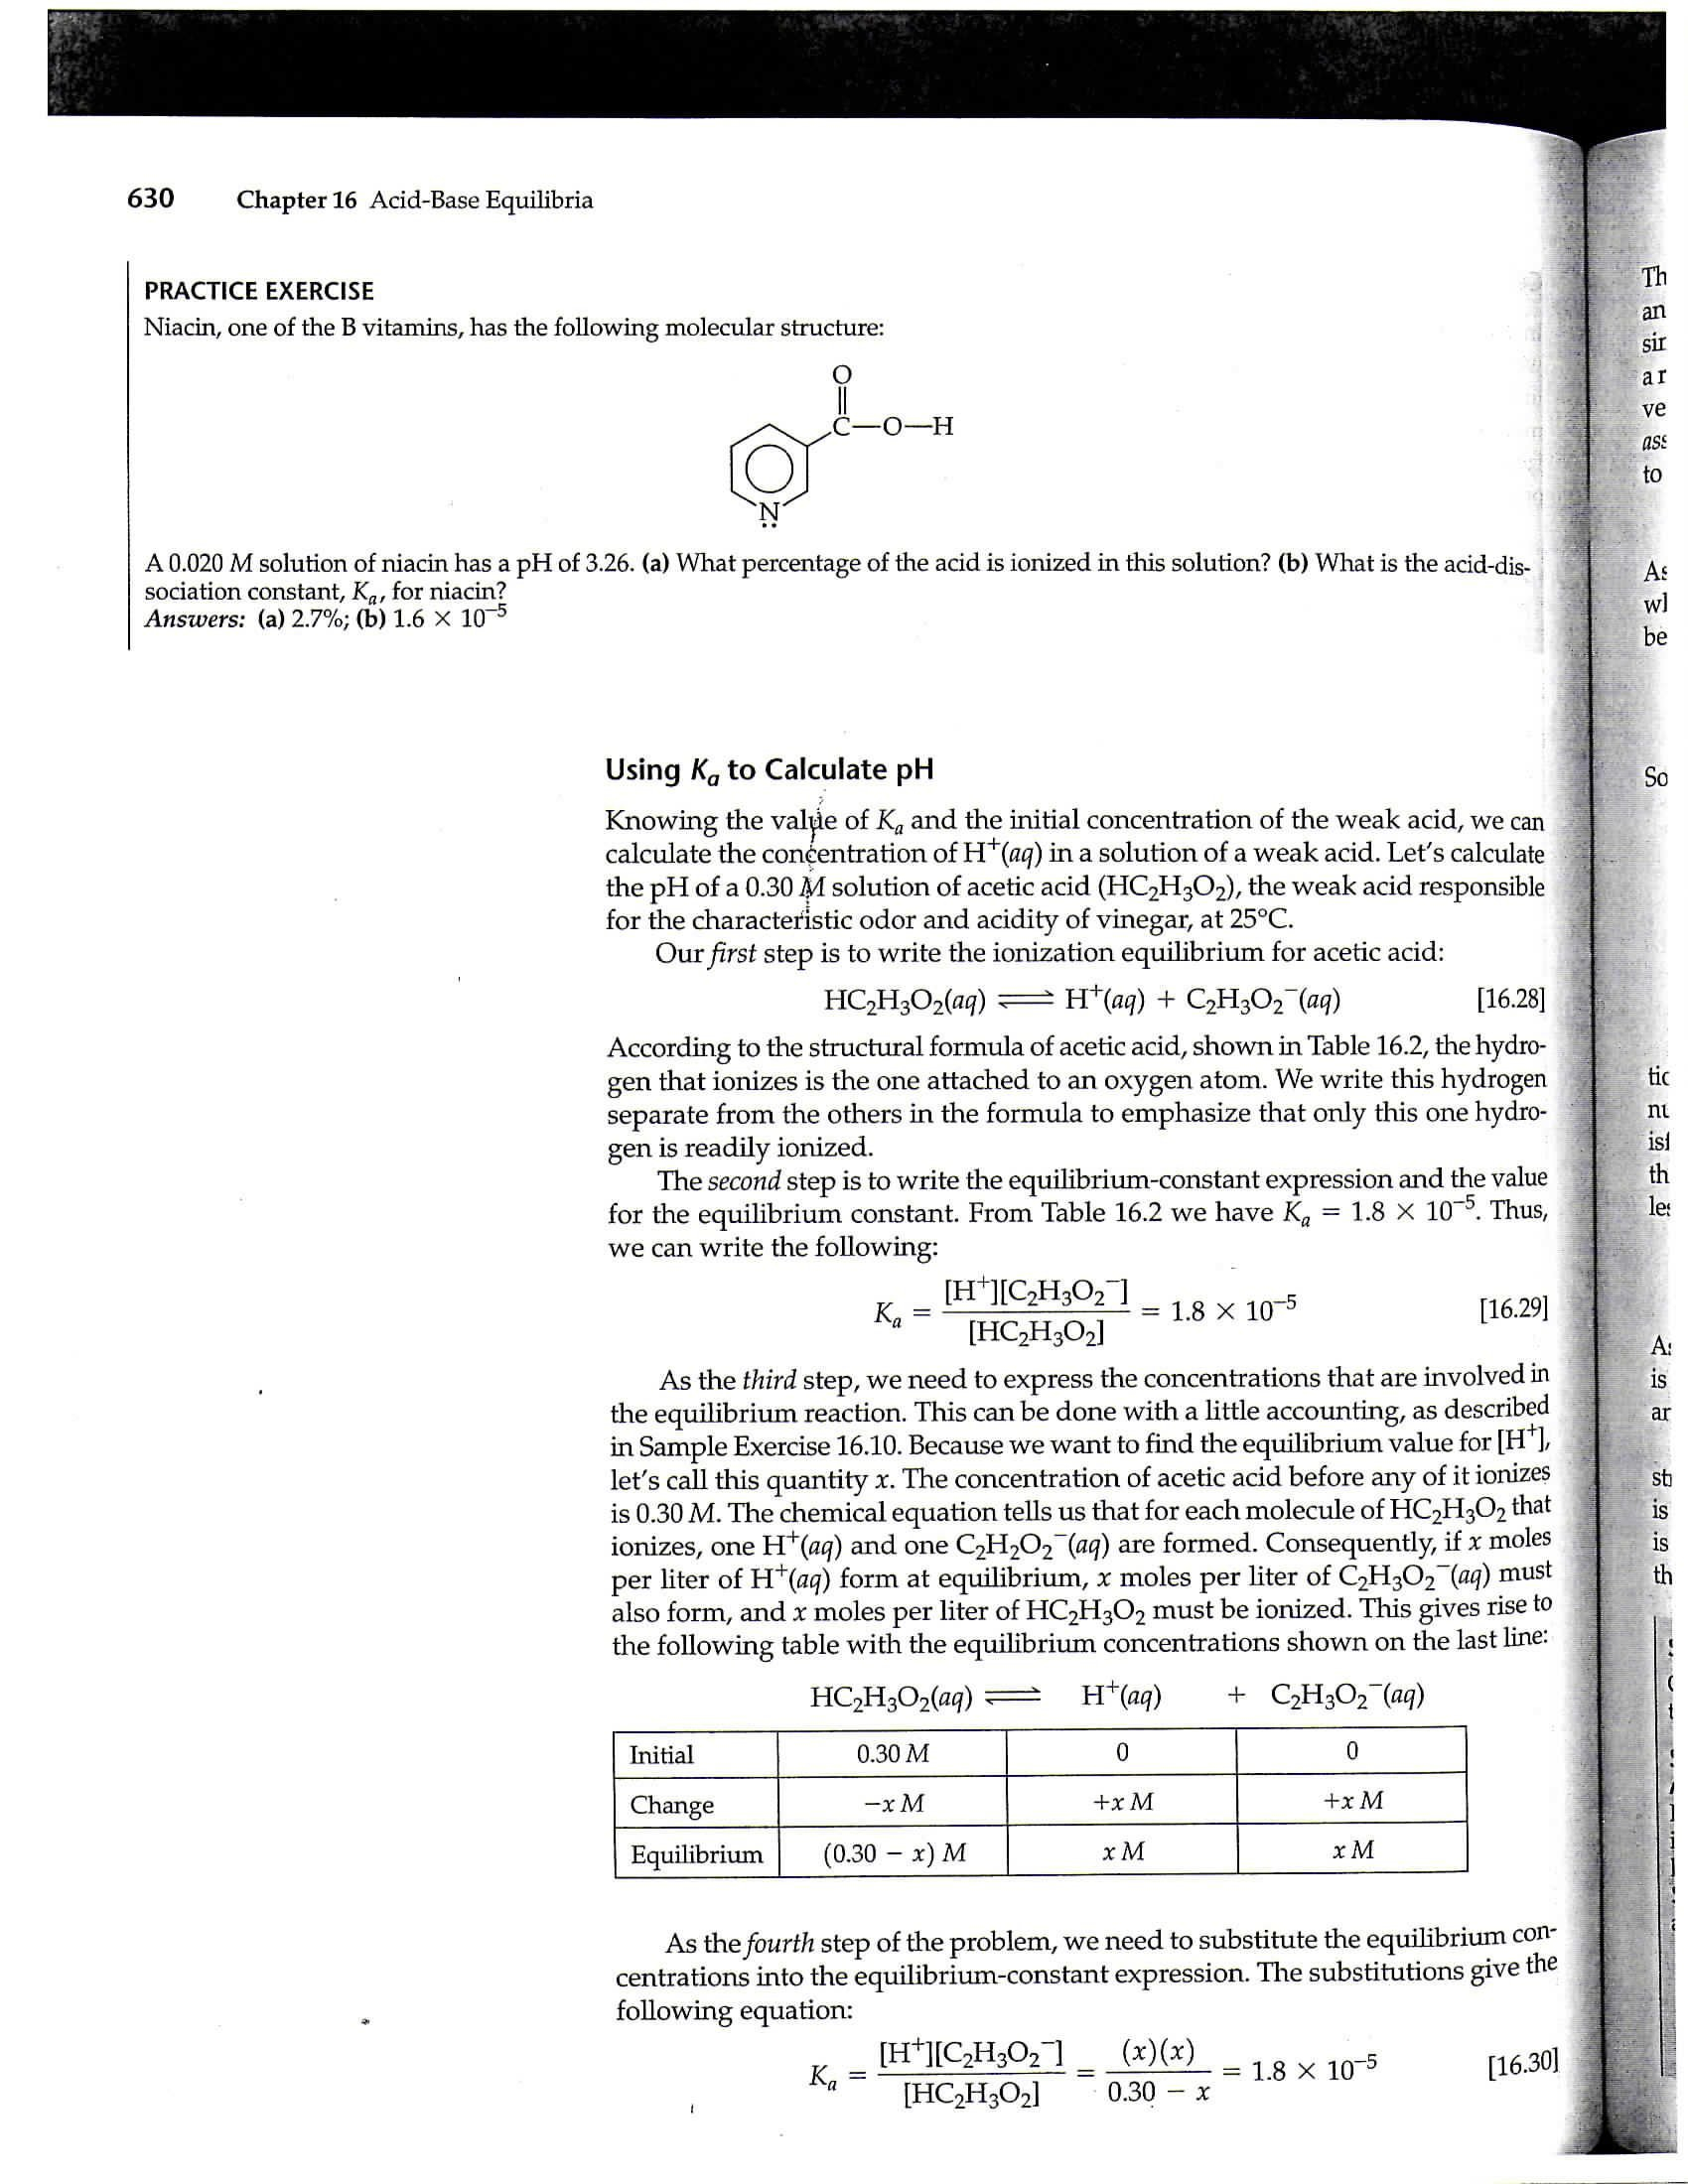 Section 163 Colligative Properties Of Solutions Worksheet Answers Together With Section 16 3 Colligative Properties Of Solutions Worksheet Answers